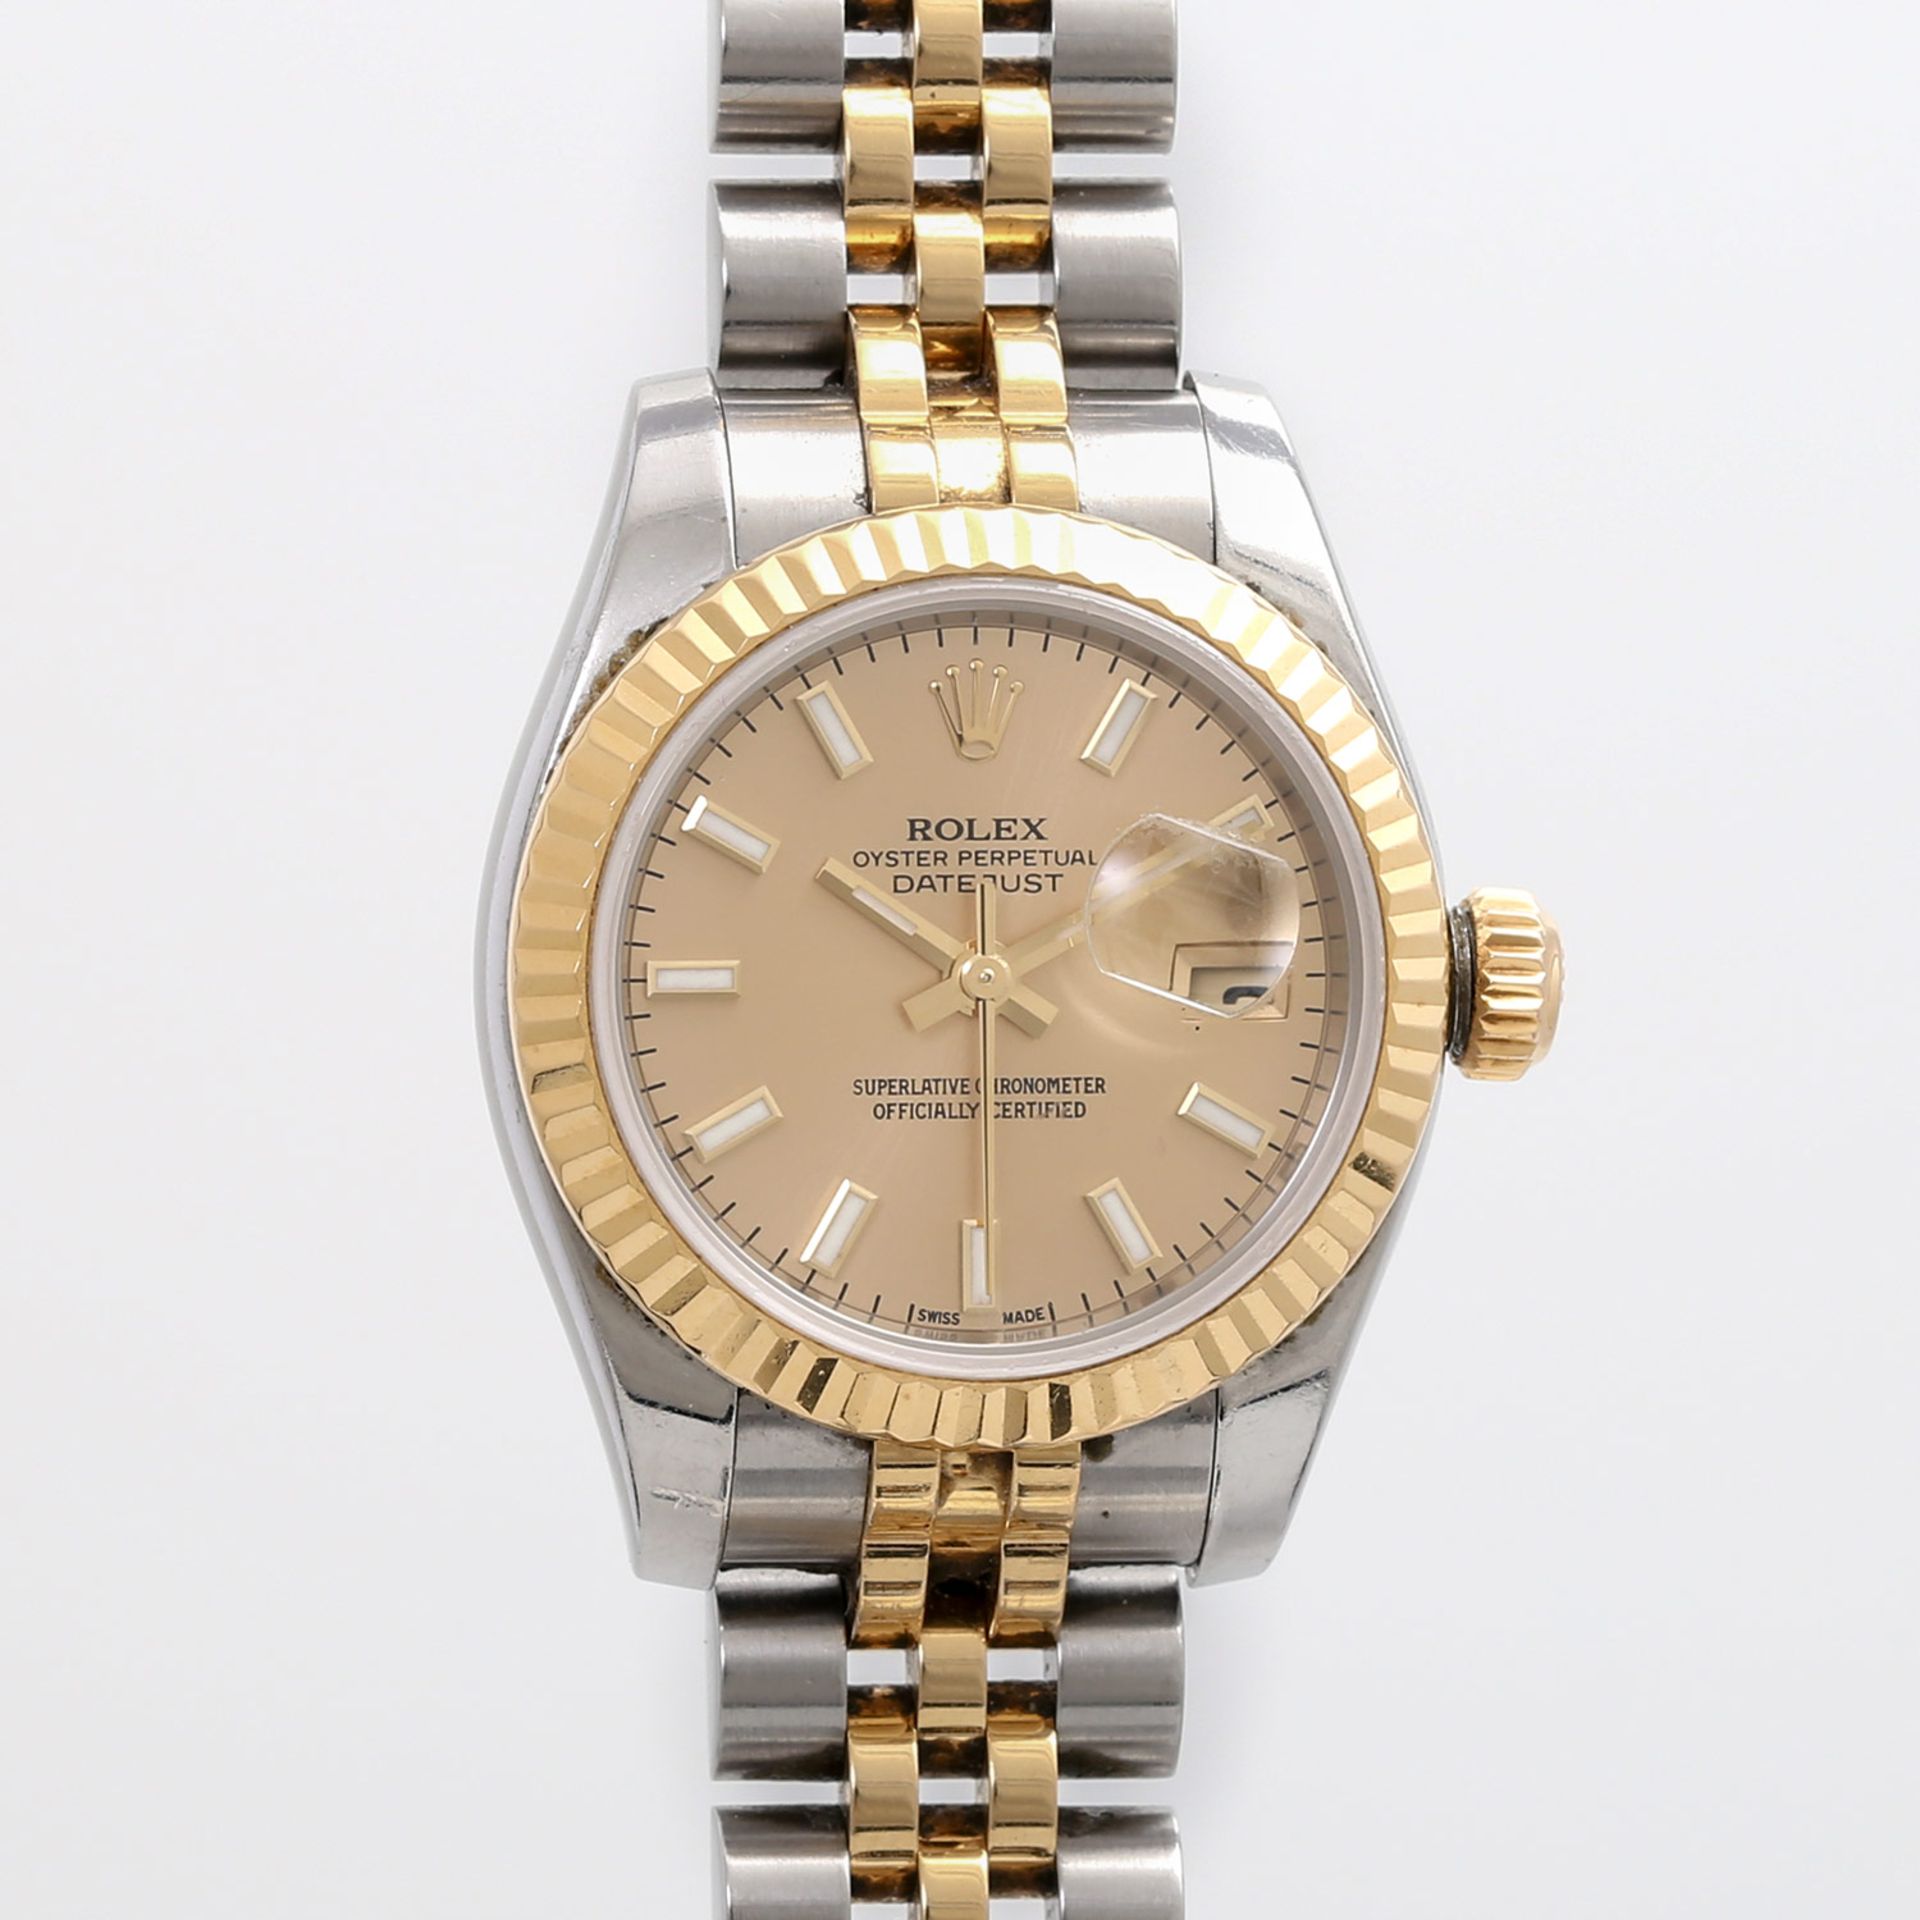 ROLEX Oyster Perpetual Datejust, Ref. 179173, D-Serie, ca. 2005/2006. Edelstahl/GG 18K. Automatic-